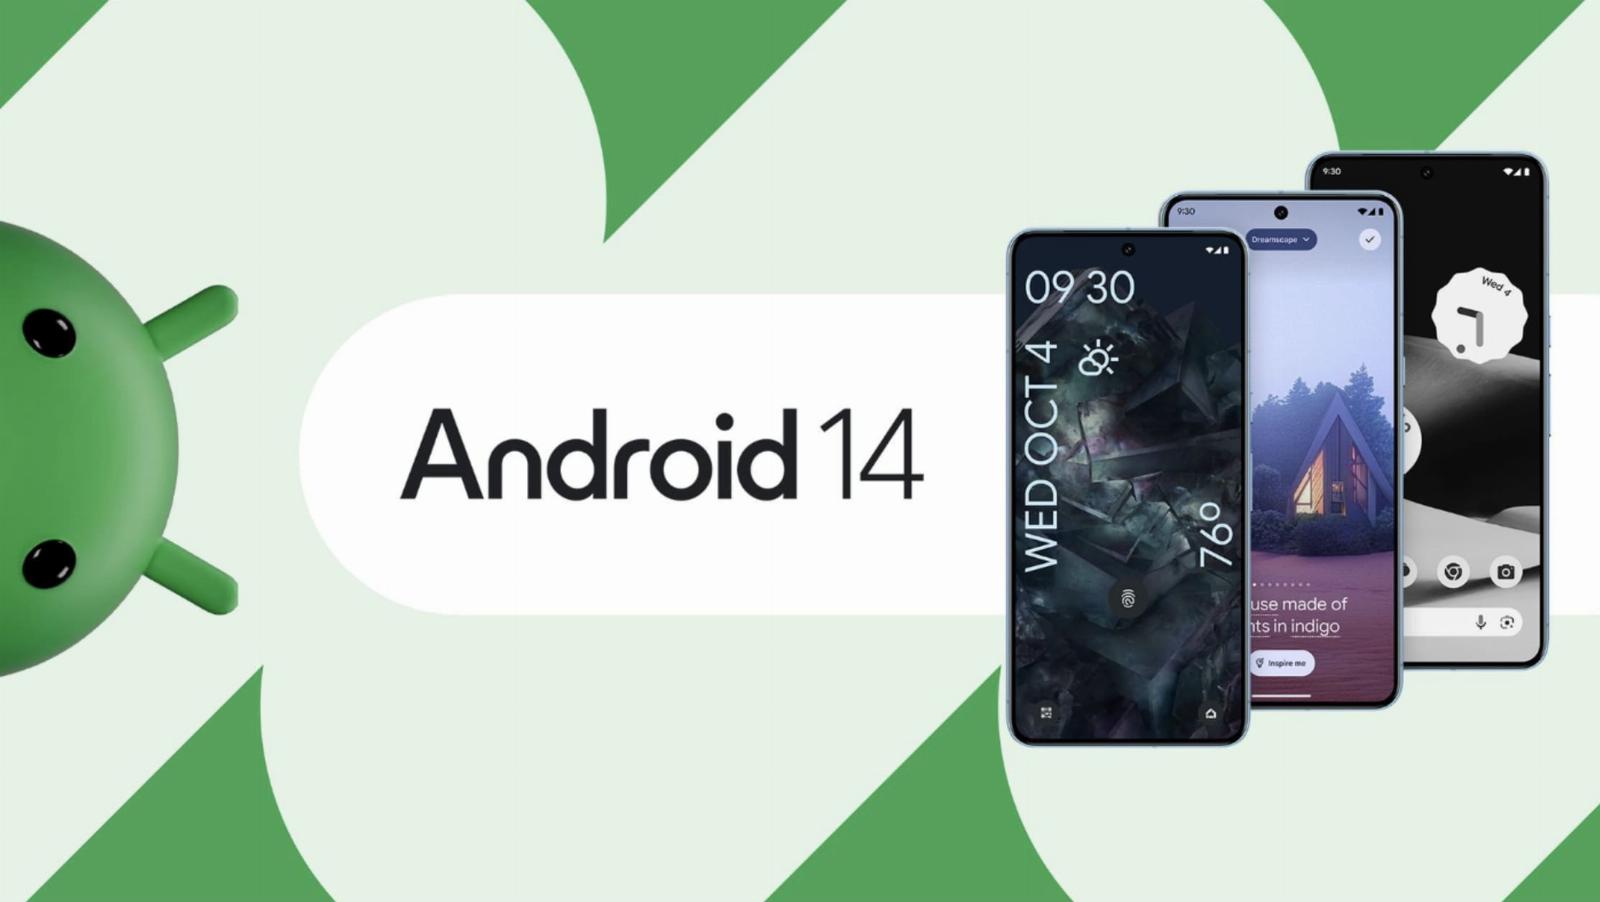 Android 14 brings new lock screen customization options, accessibility features and more